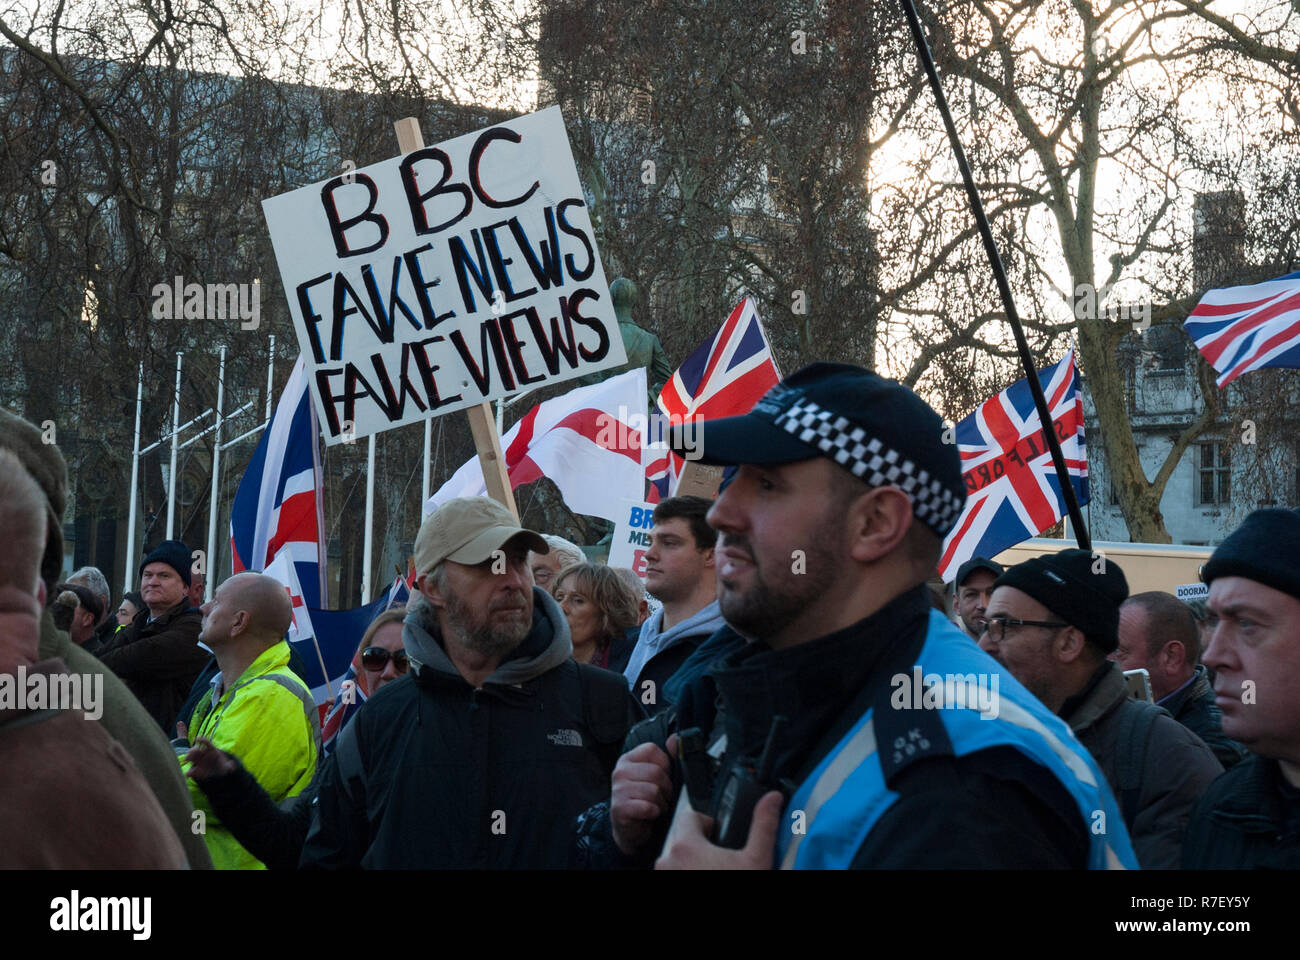 Pro Brexit Rally, London UK, organised by UKIP with far right supporters. Placard with "BBC FAKE NEWS, FAKE VIEWS" Stock Photo